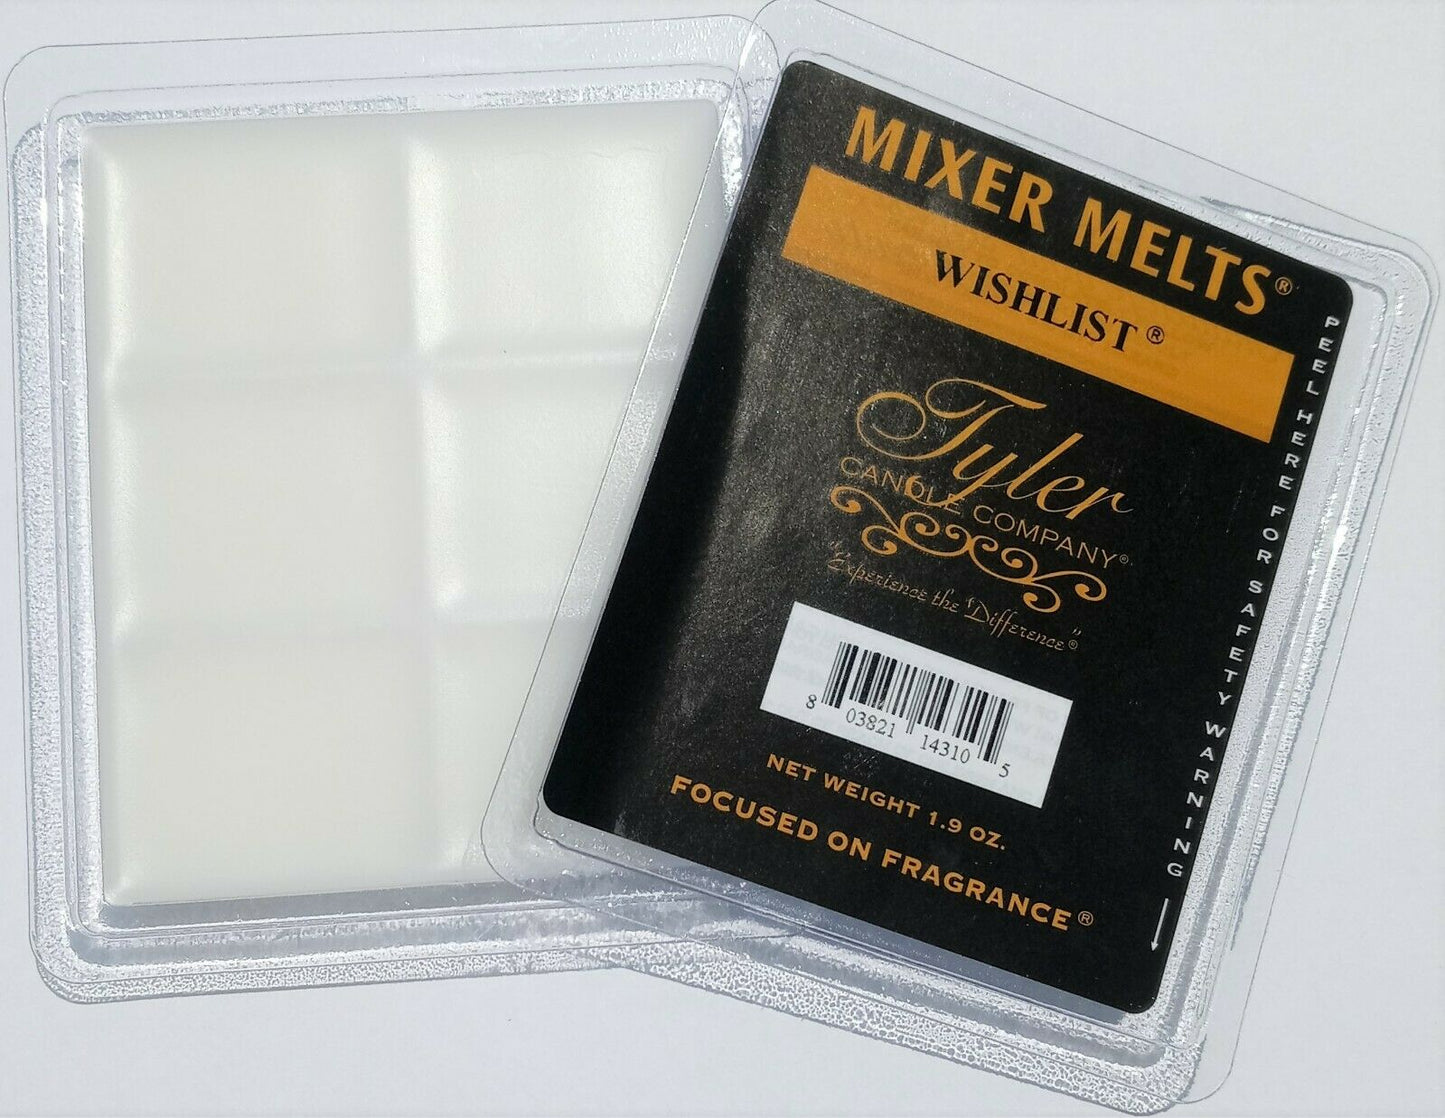 WISHLIST Fragrance Scented Wax Mixer Melts by Tyler Candles